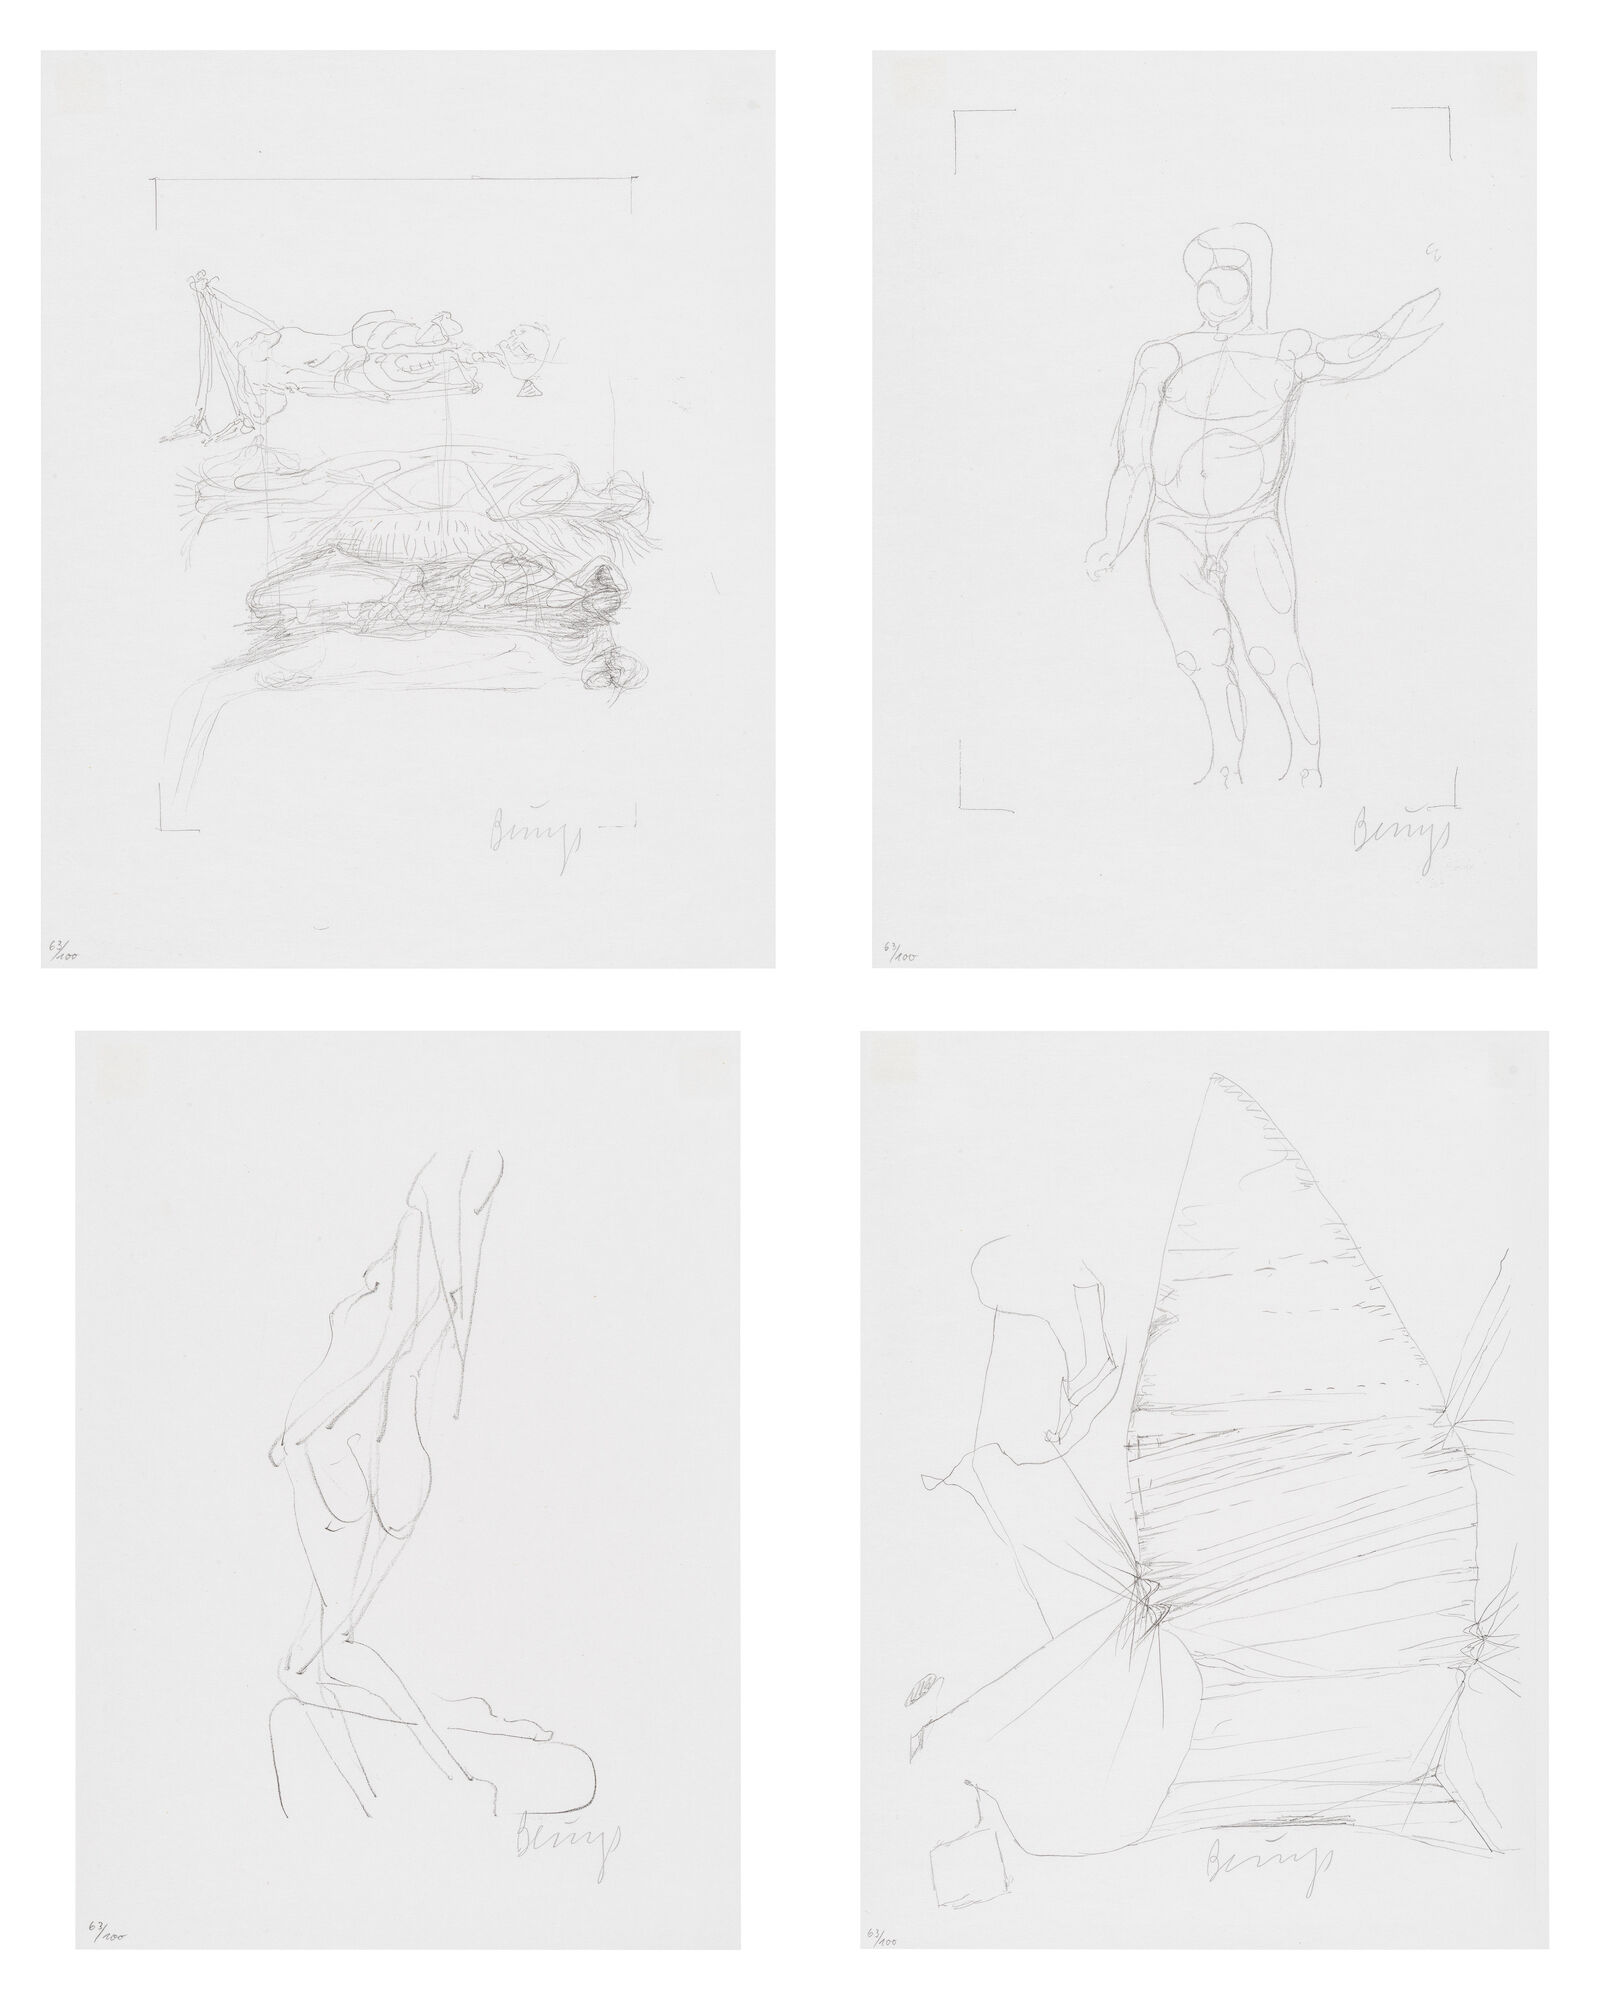 Picture "Drawings for Codices Madrid" (1975) by Joseph Beuys